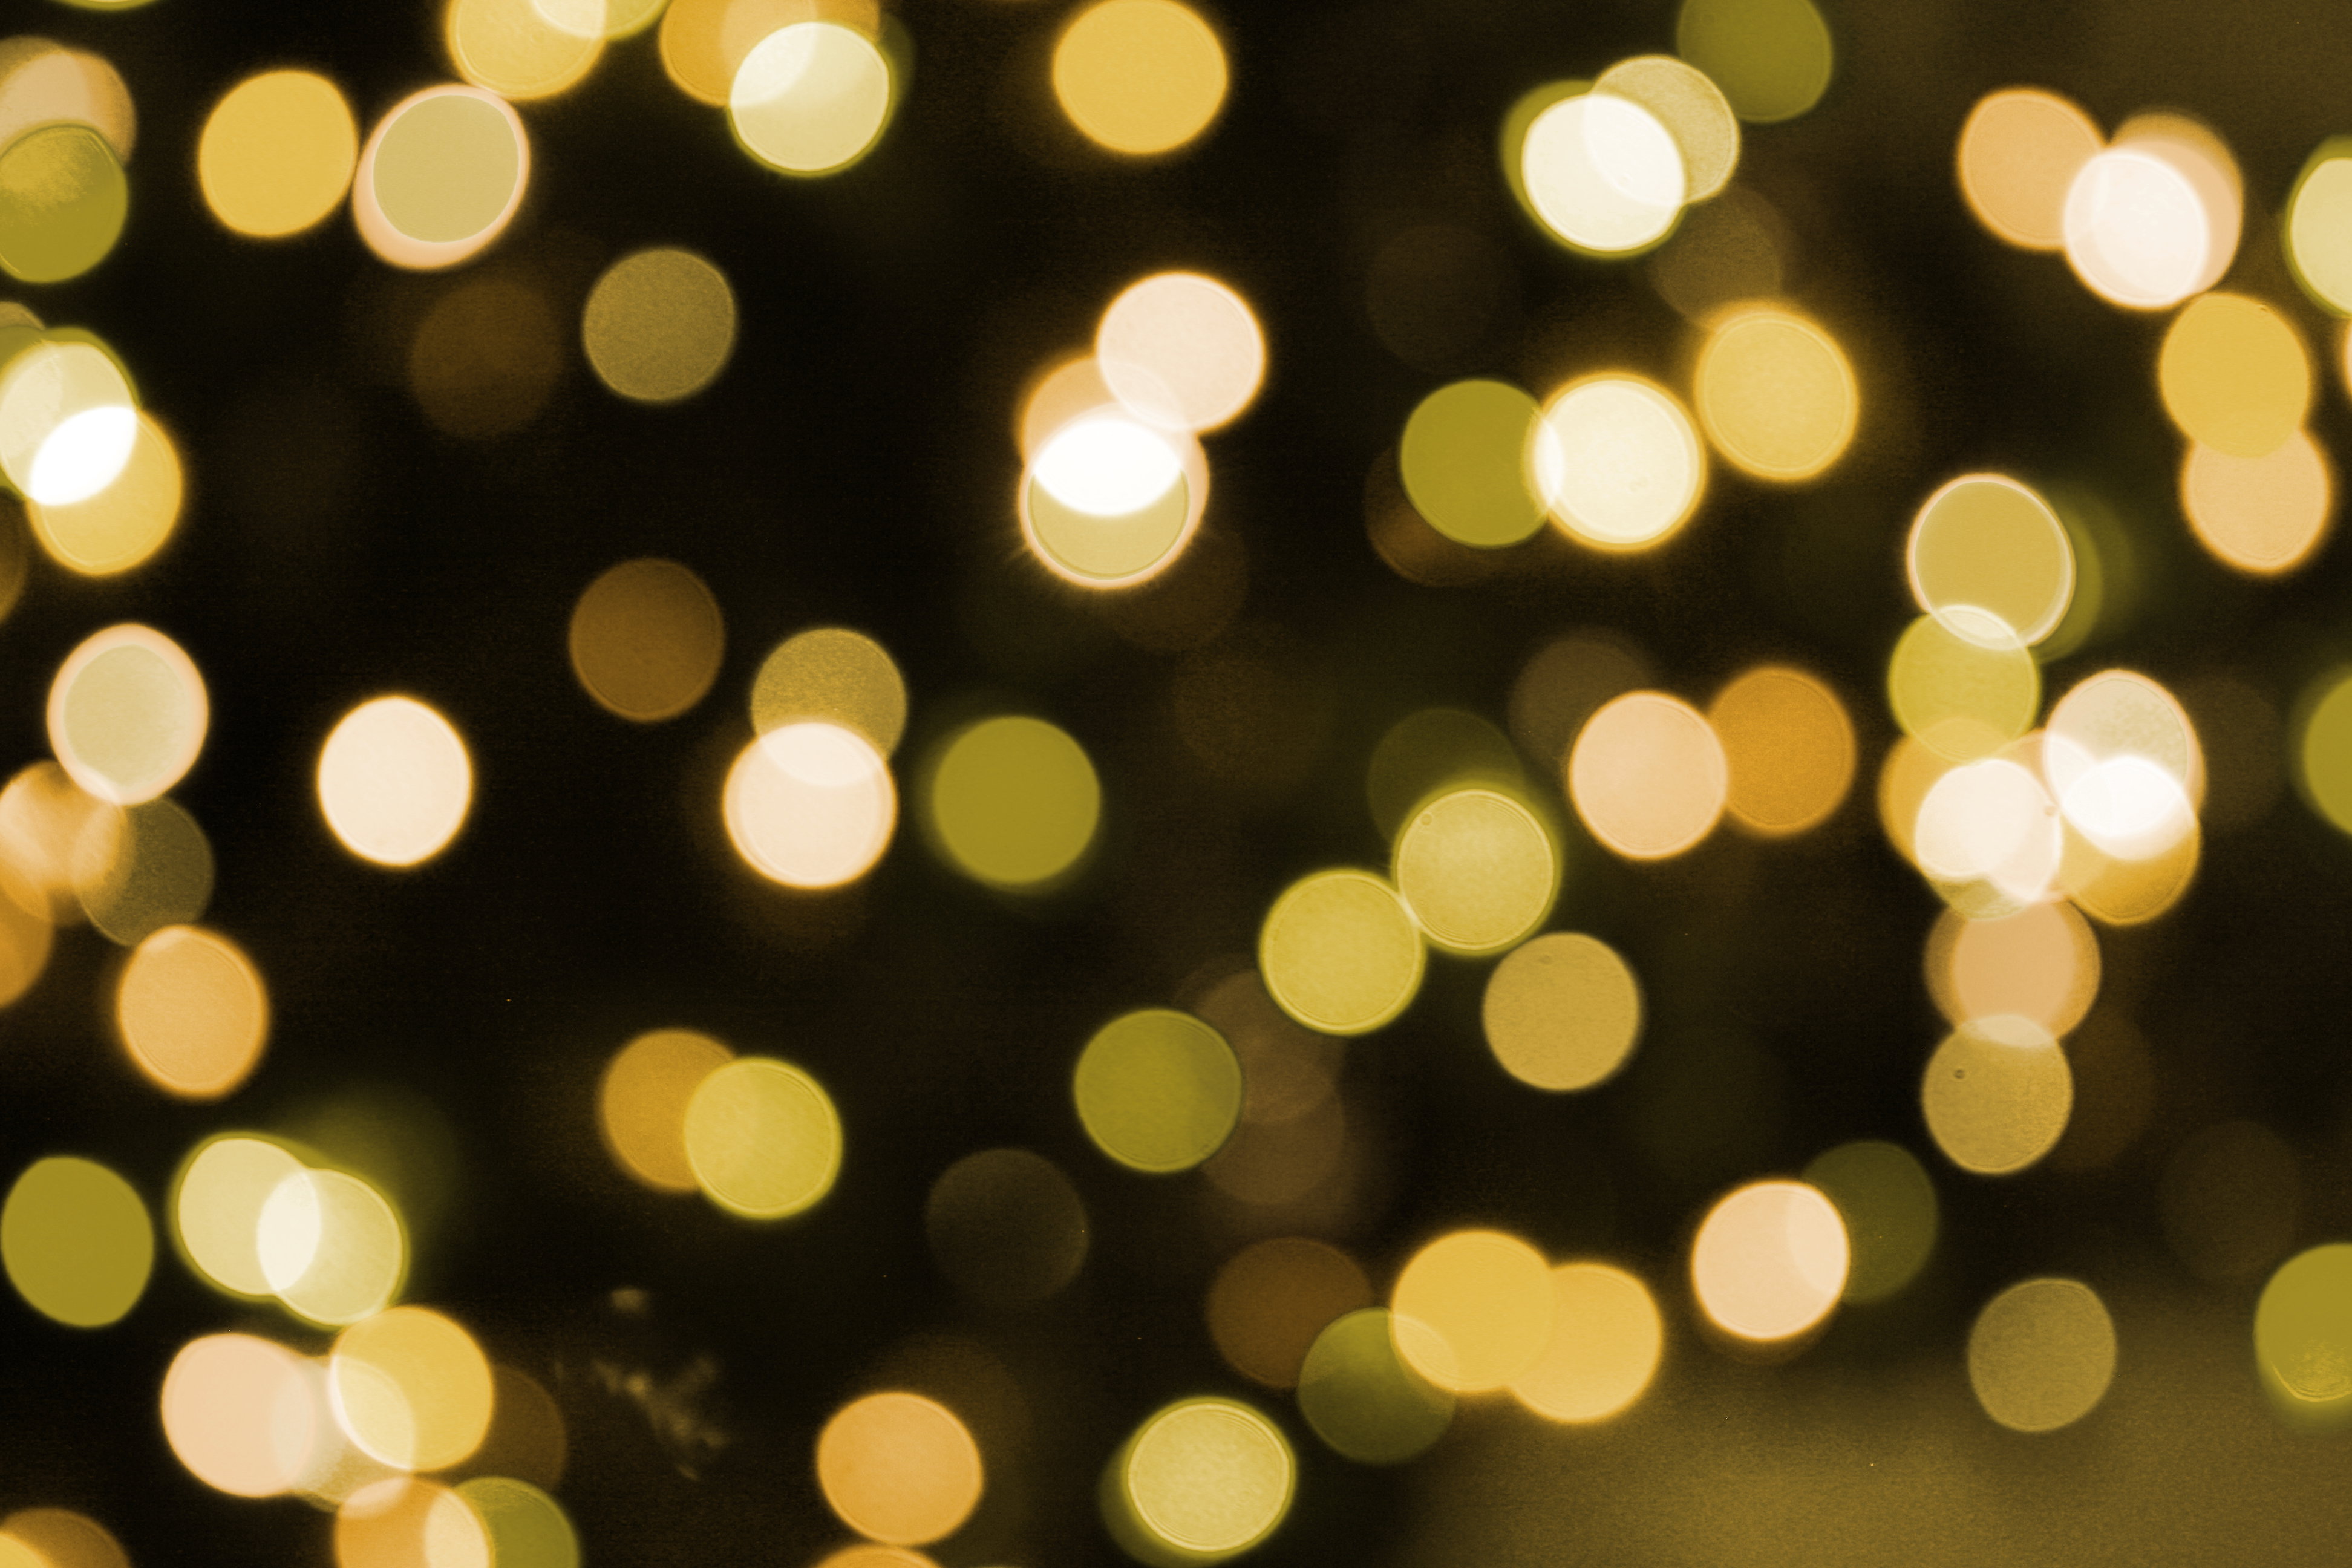 Soft Focus Gold Christmas Lights Texture Picture | Free Photograph ...